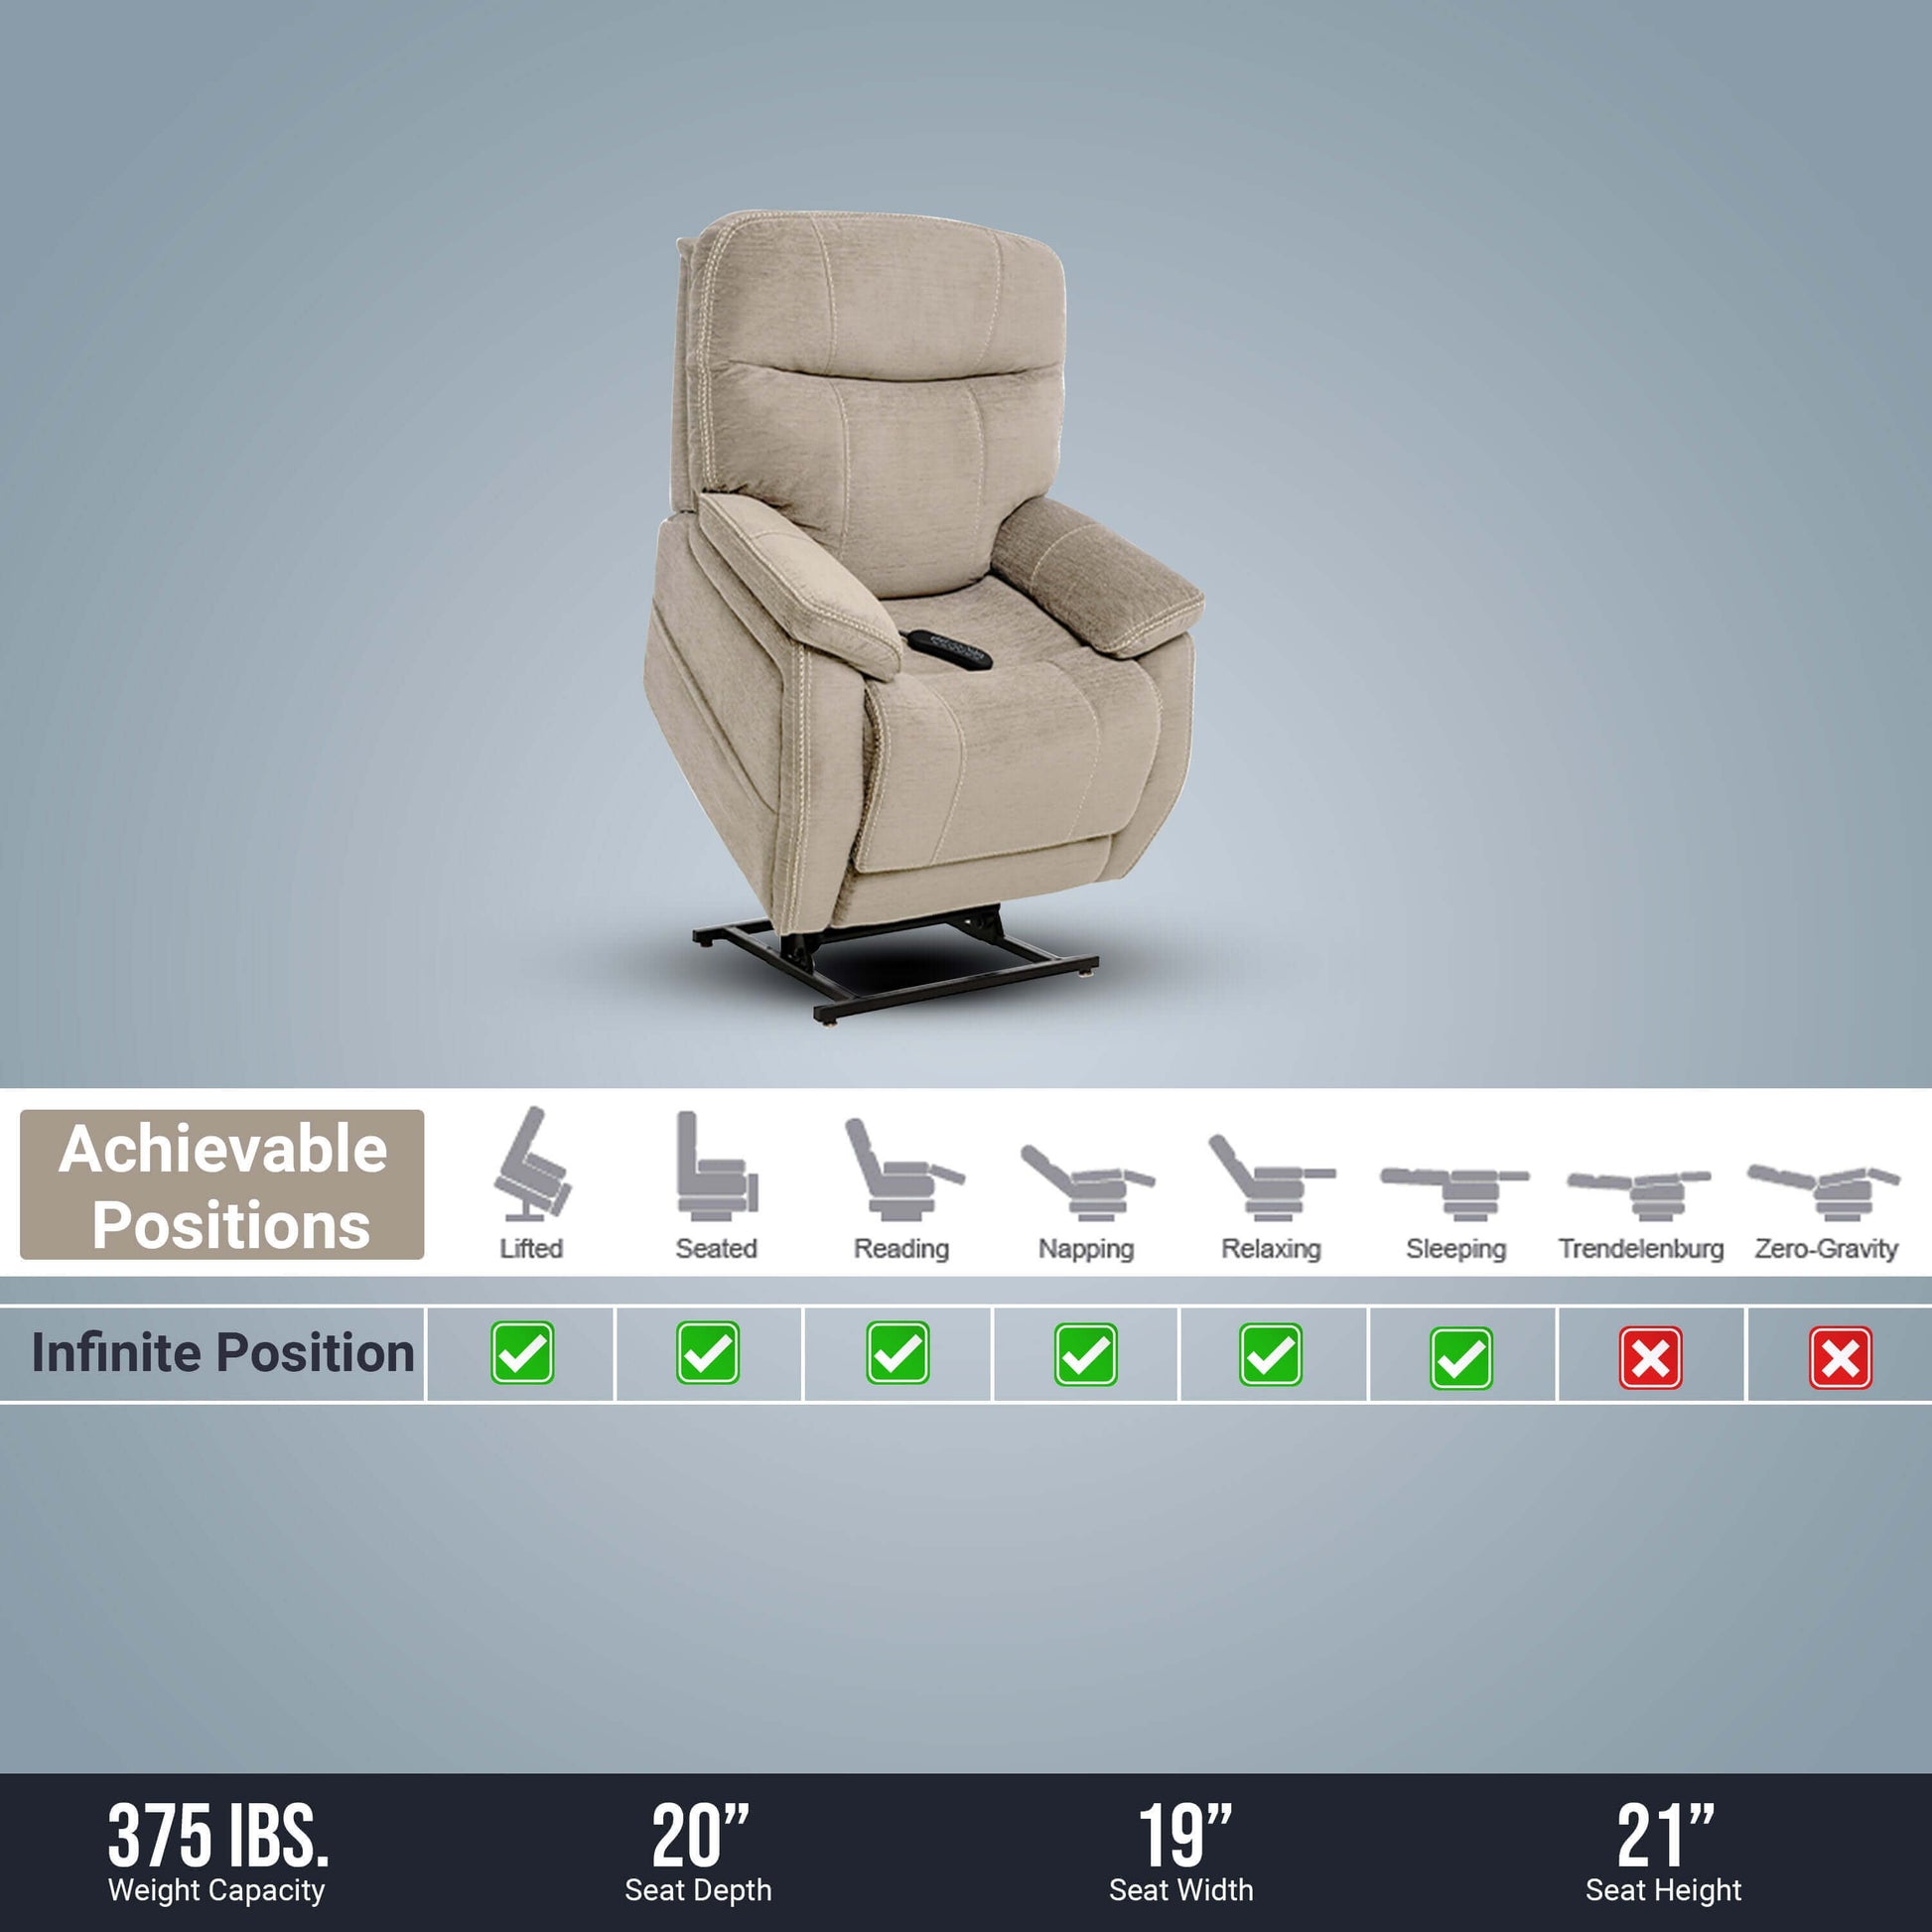 Mega Motion MM-3710 Infinite Position Lift Chair in Natural Cream photo image showing all the available positions and the seat dimensions